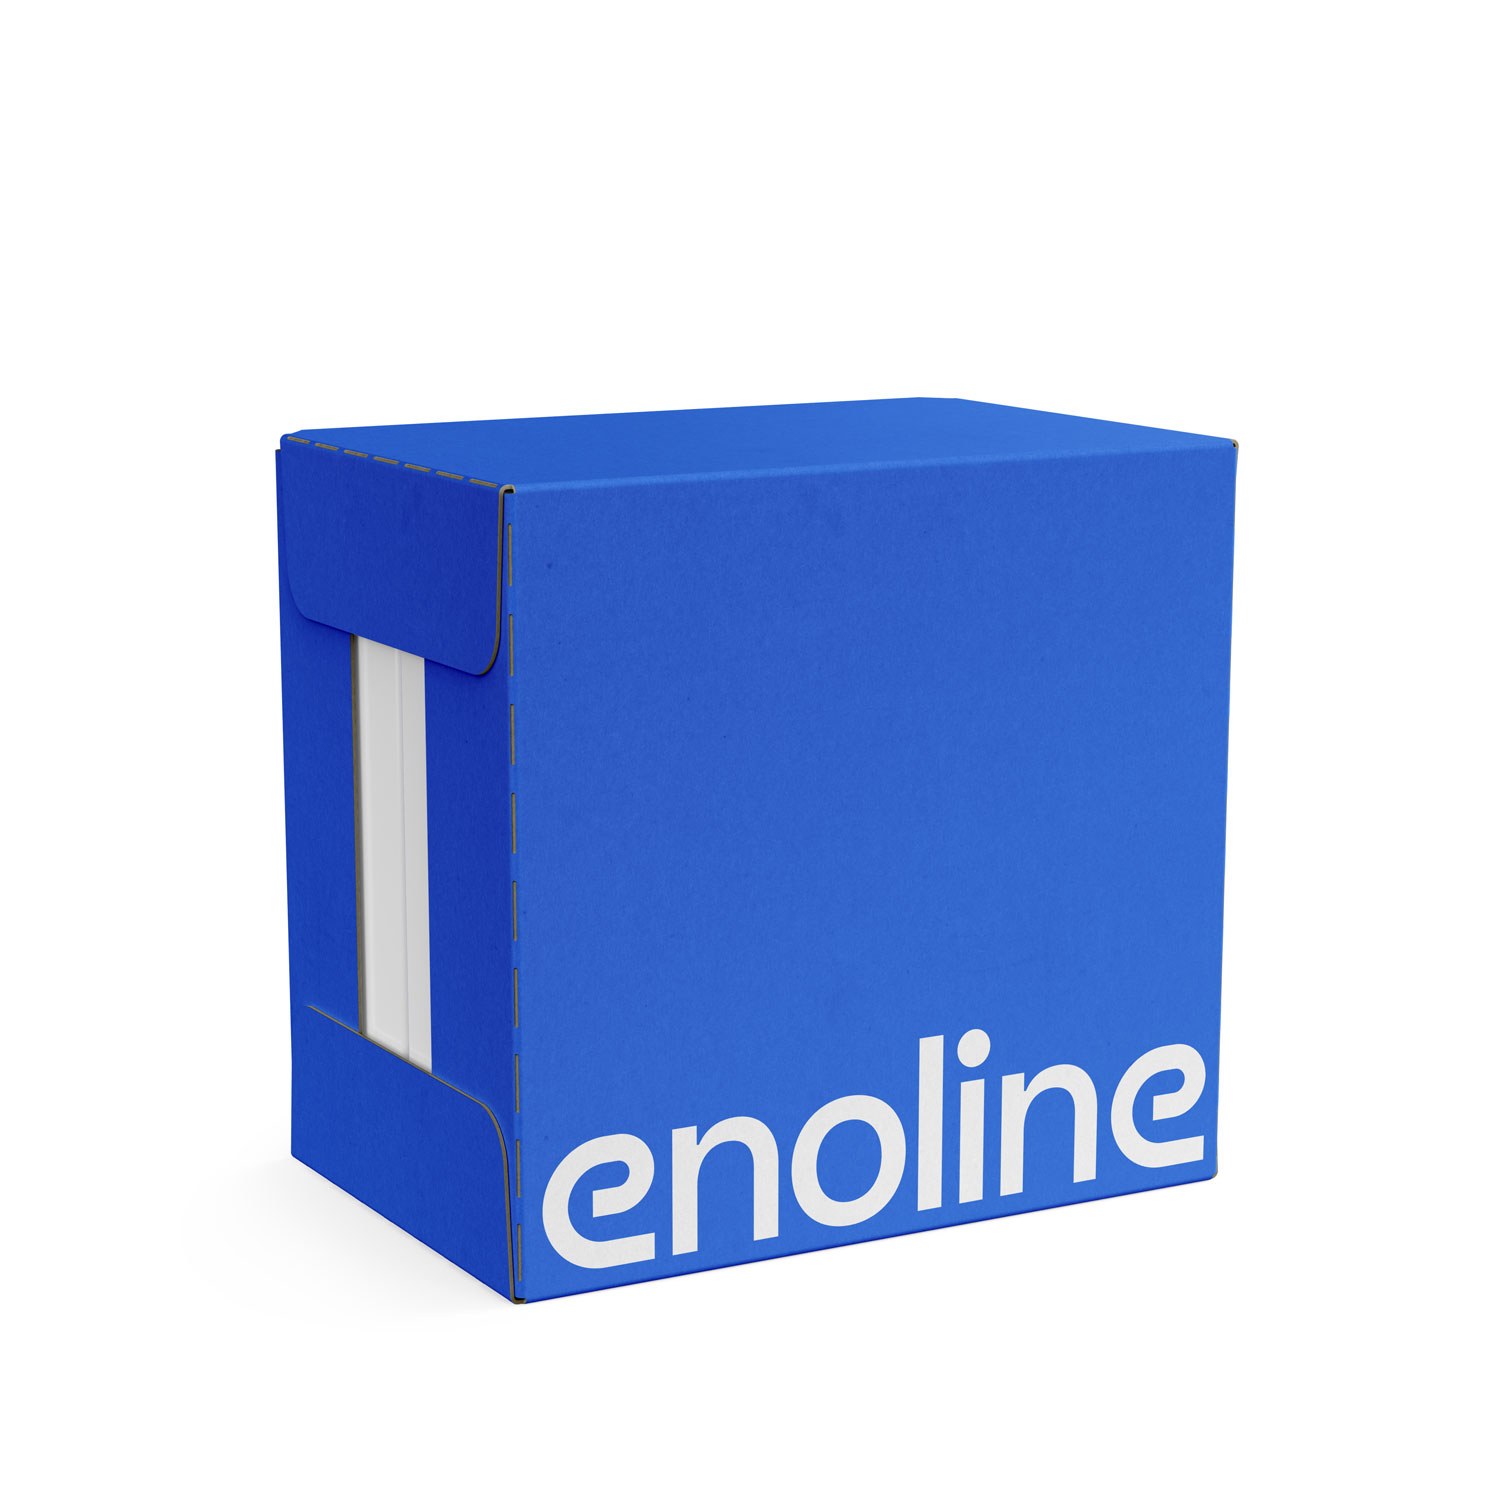 Enoline packaging solution wrap around cartoner case packing